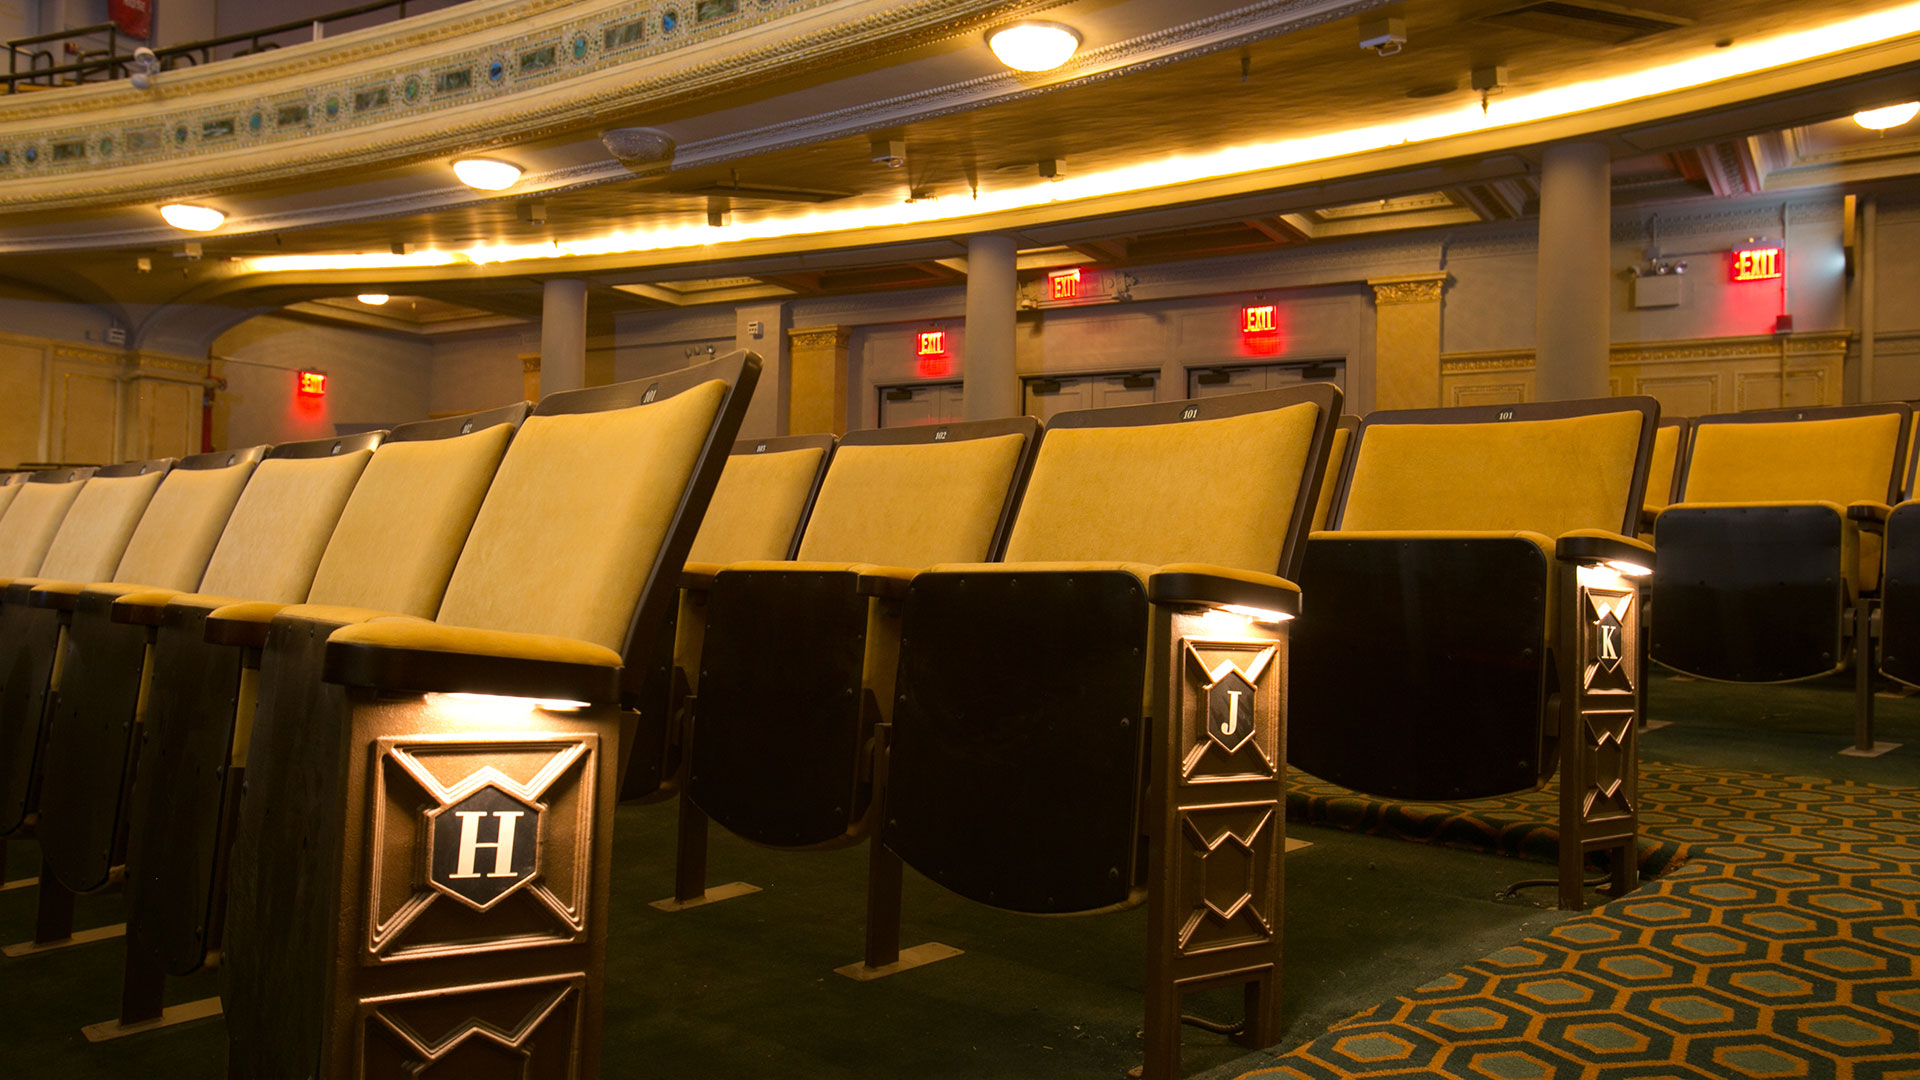 Oxford Traditional Hardwood Theatre Chairs by Kirwin & Simpson for Hudson Theatre Broadway